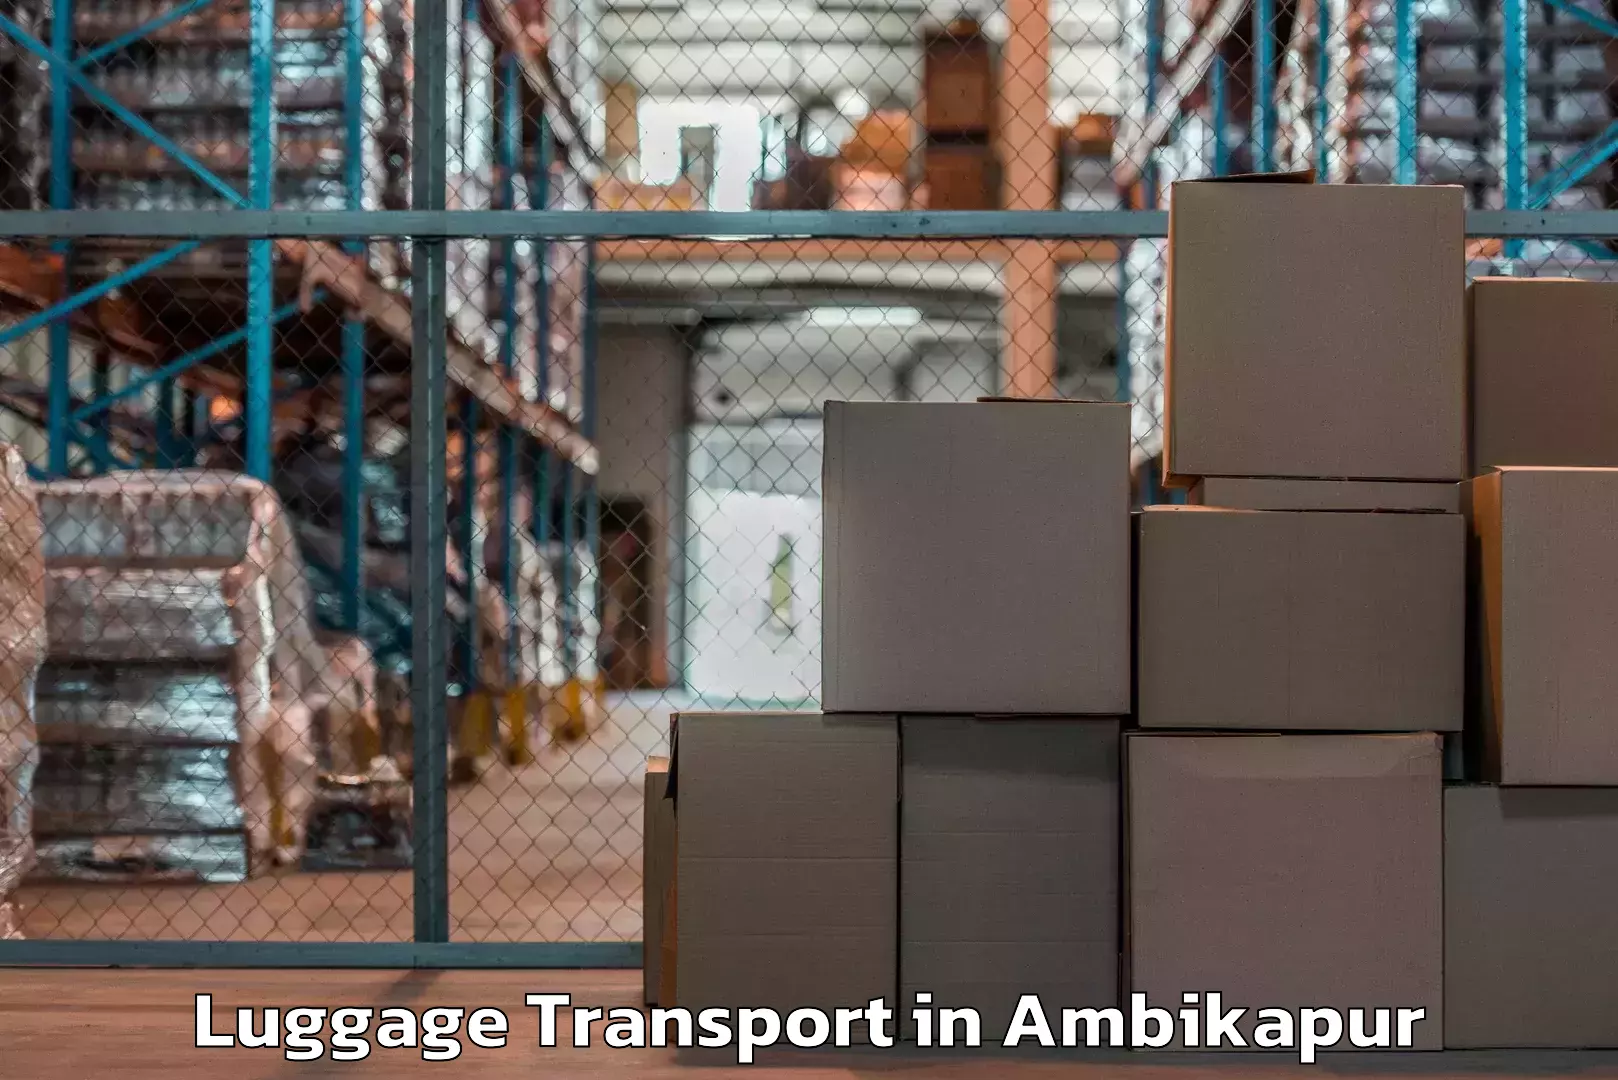 Excess baggage transport in Ambikapur